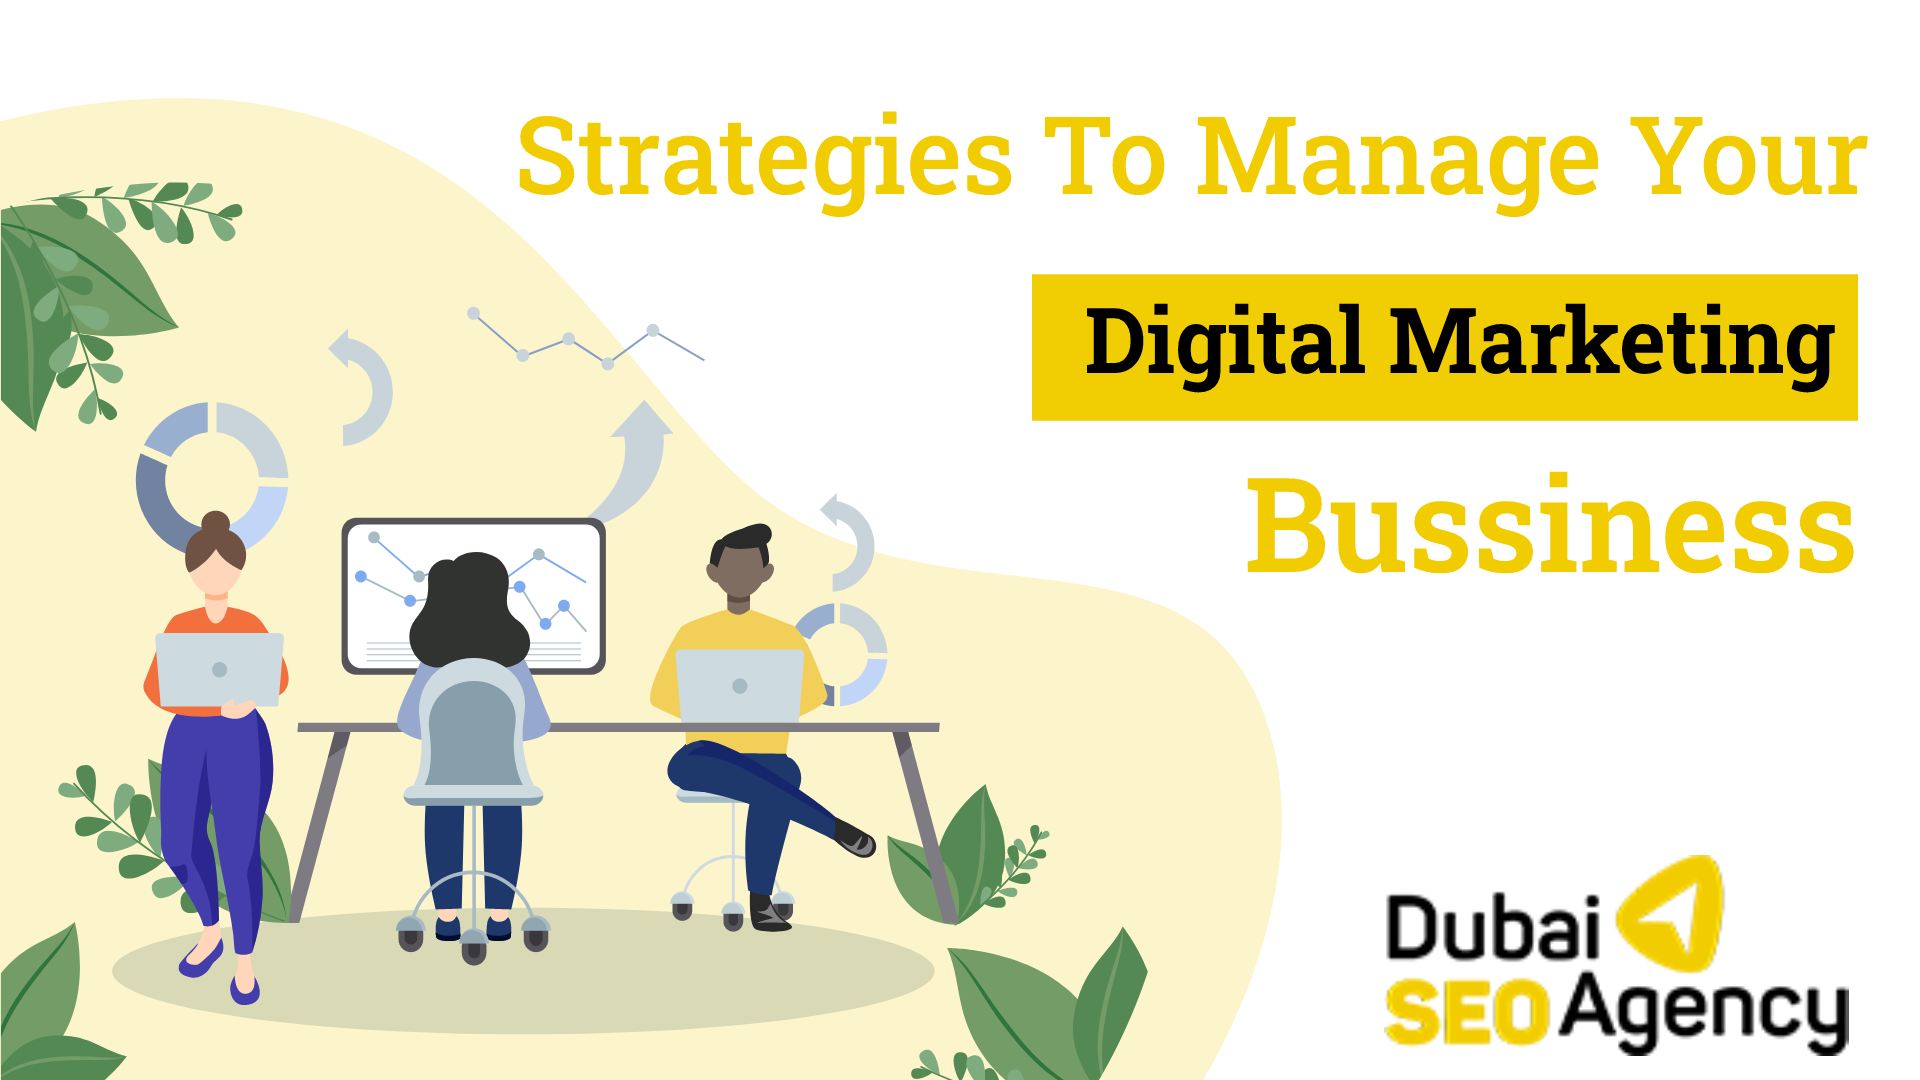 Strategies to manage your digital marketing business